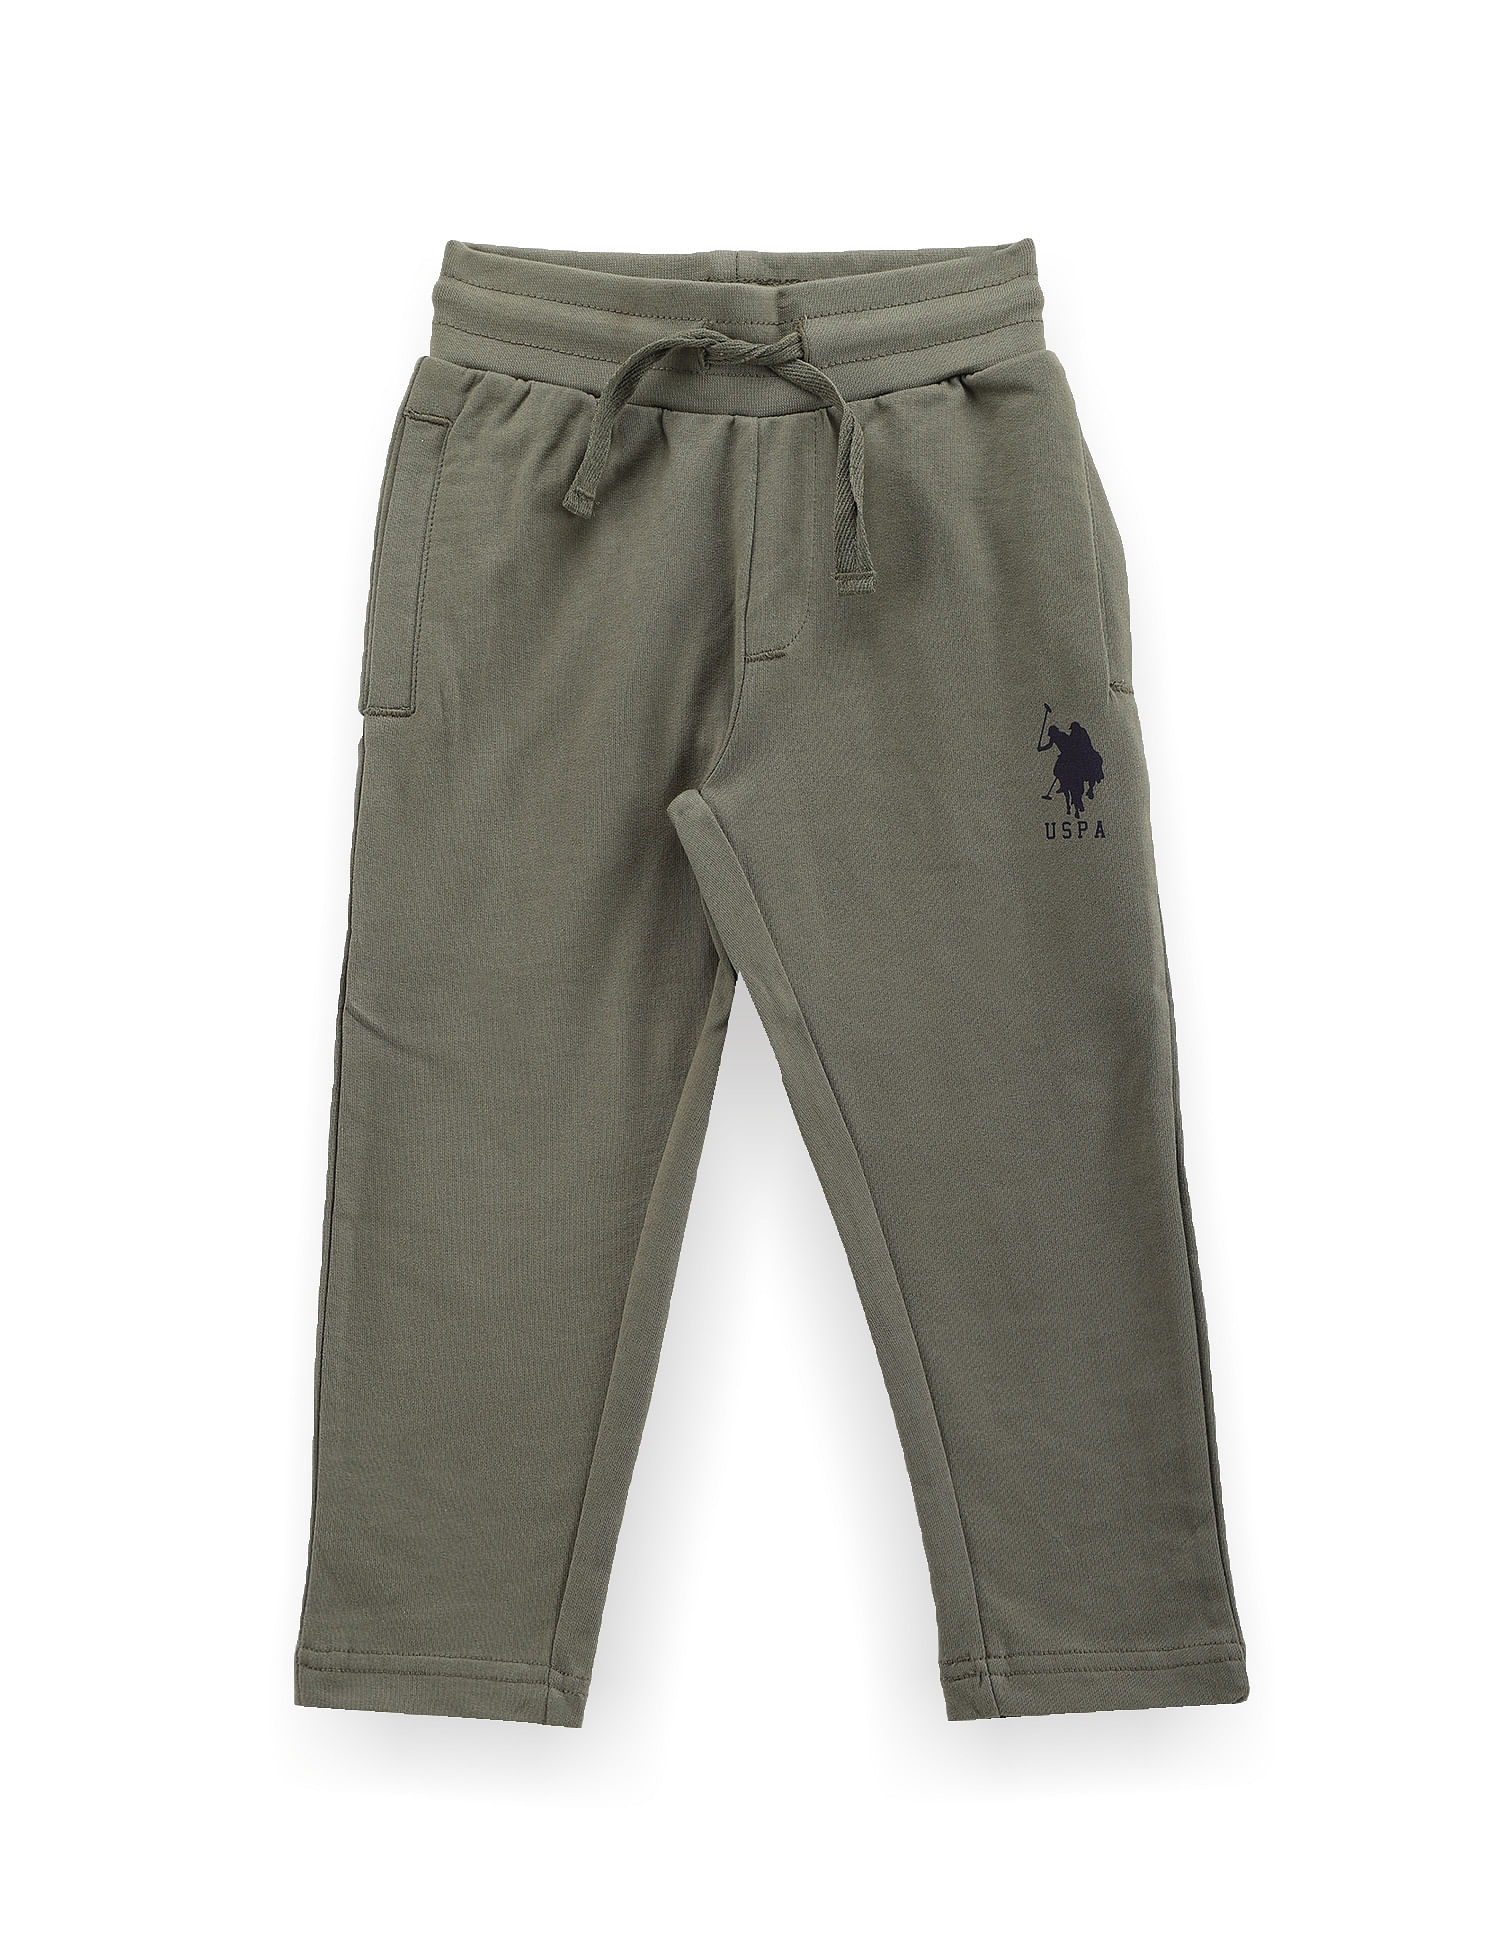 US Polo Assn. Boy's S02 Slim Fit Jogger Track Pants